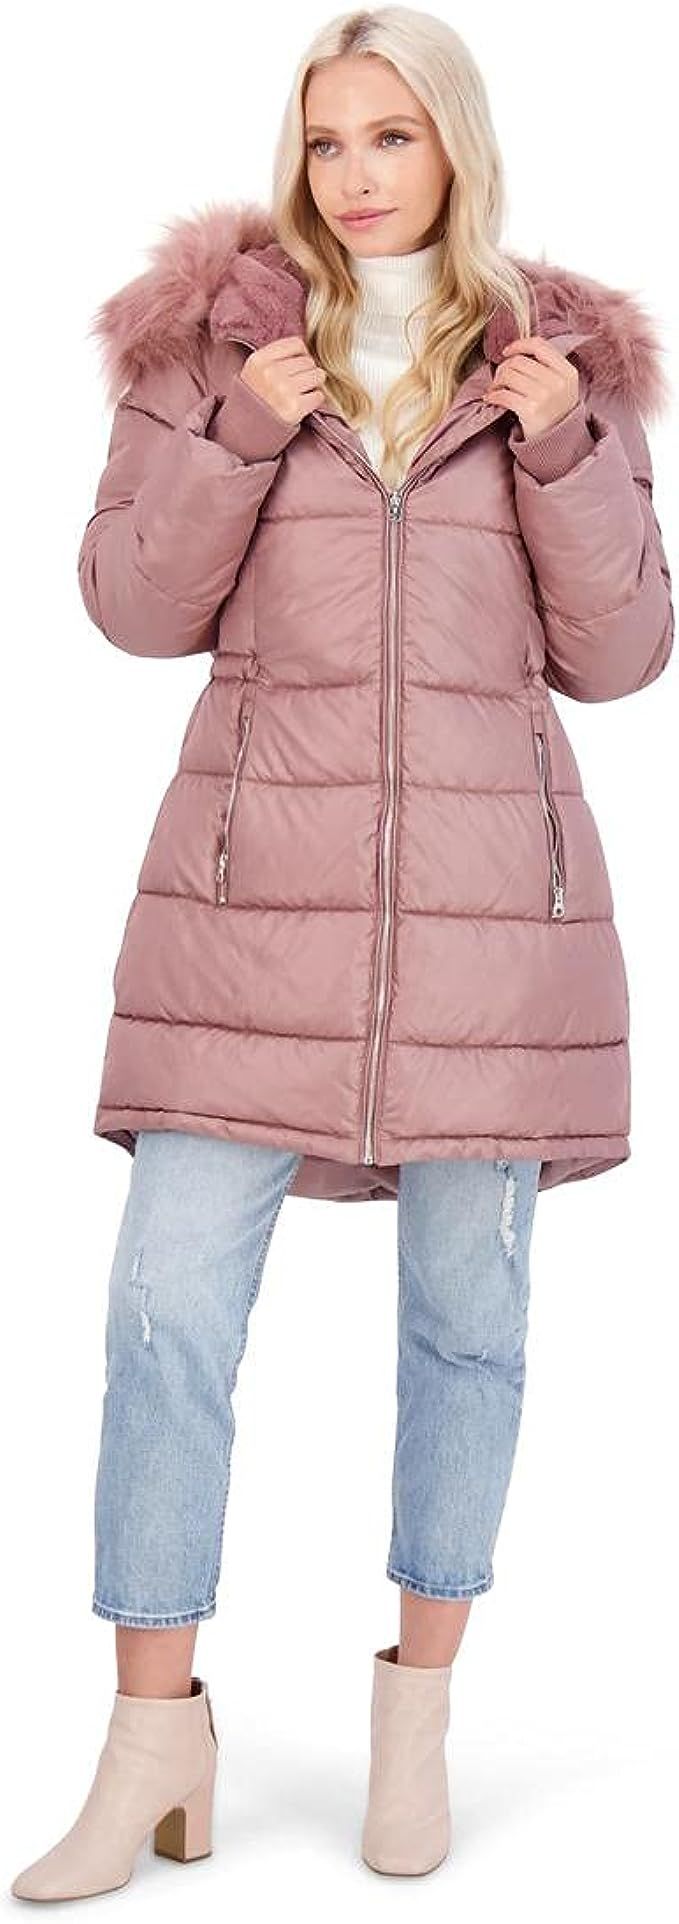 Jessica Simpson Puffer Coat For Women - Quilted Winter Coat w/ Faux Fur Hood | Amazon (US)